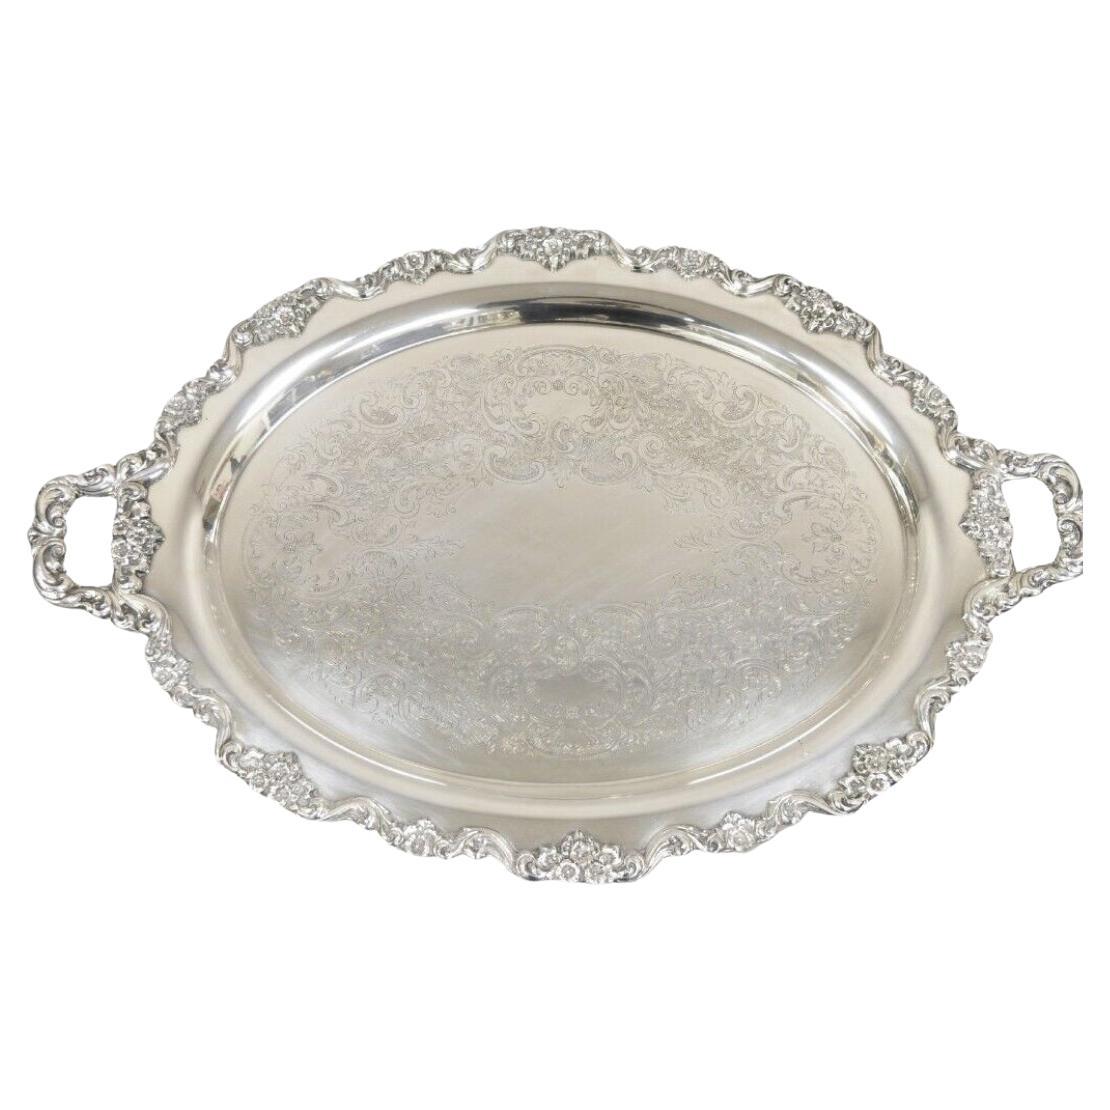 EPCA Poole Silver Co 400 Lancaster Rose Large Silver Plated Serving Platter Tray For Sale